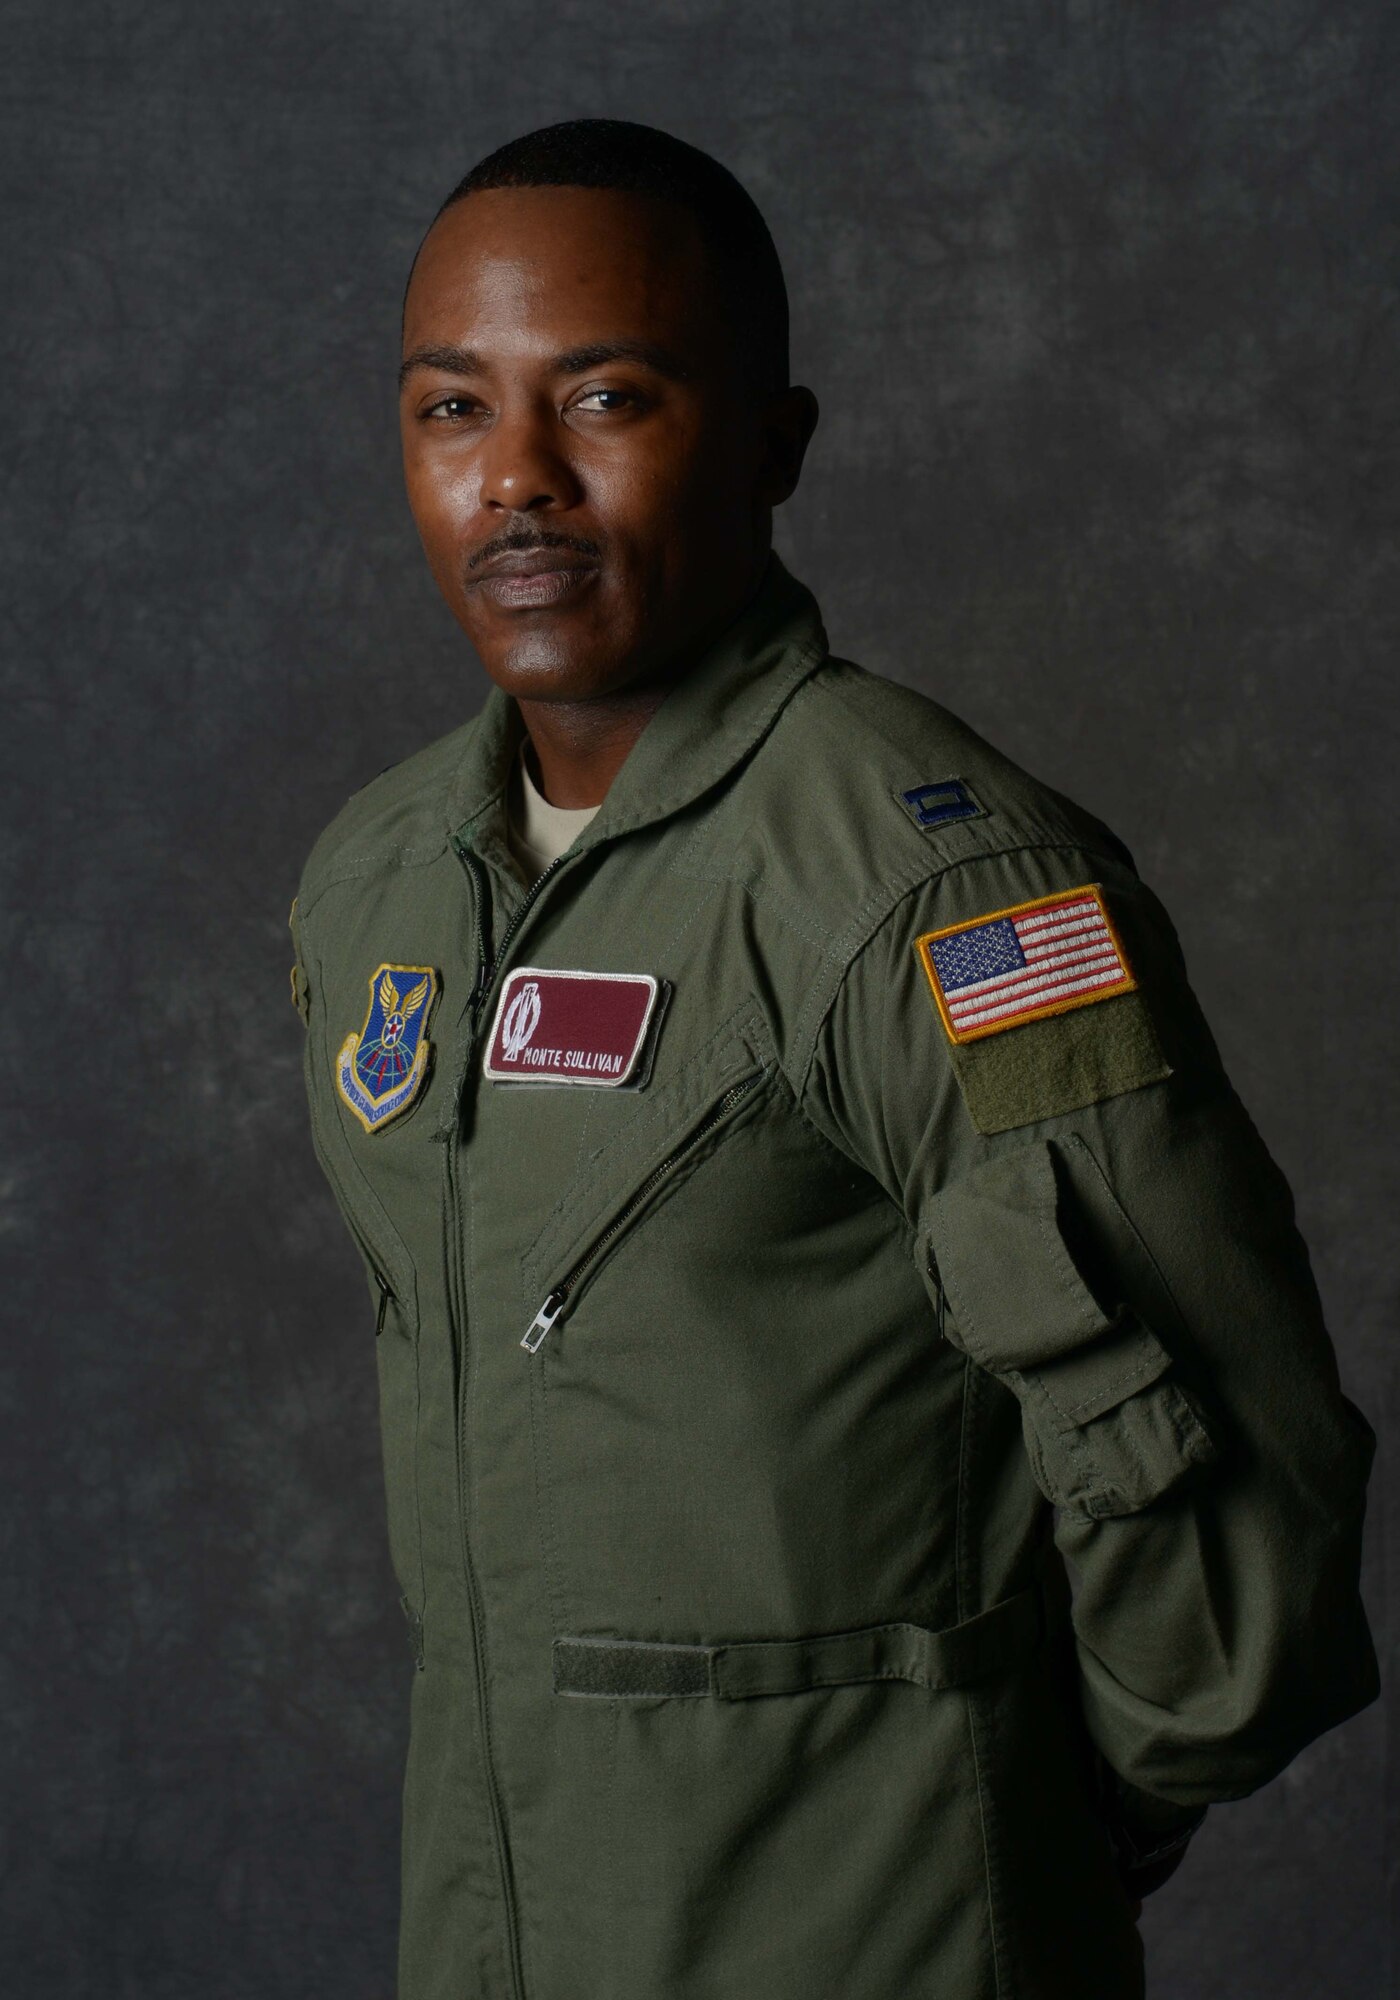 Capt. Romonte Sullivan, 91st Operations Group executive officer, poses for a photo at Minot Air Force Base, N.D., Aug. 8, 2016. Sullivan was chosen to attend the Striker Pathfinder Program, a three-year internship at Air Force Global Strike Commander headquarters. (U.S. Air Force photo/Senior Airman Apryl Hall)